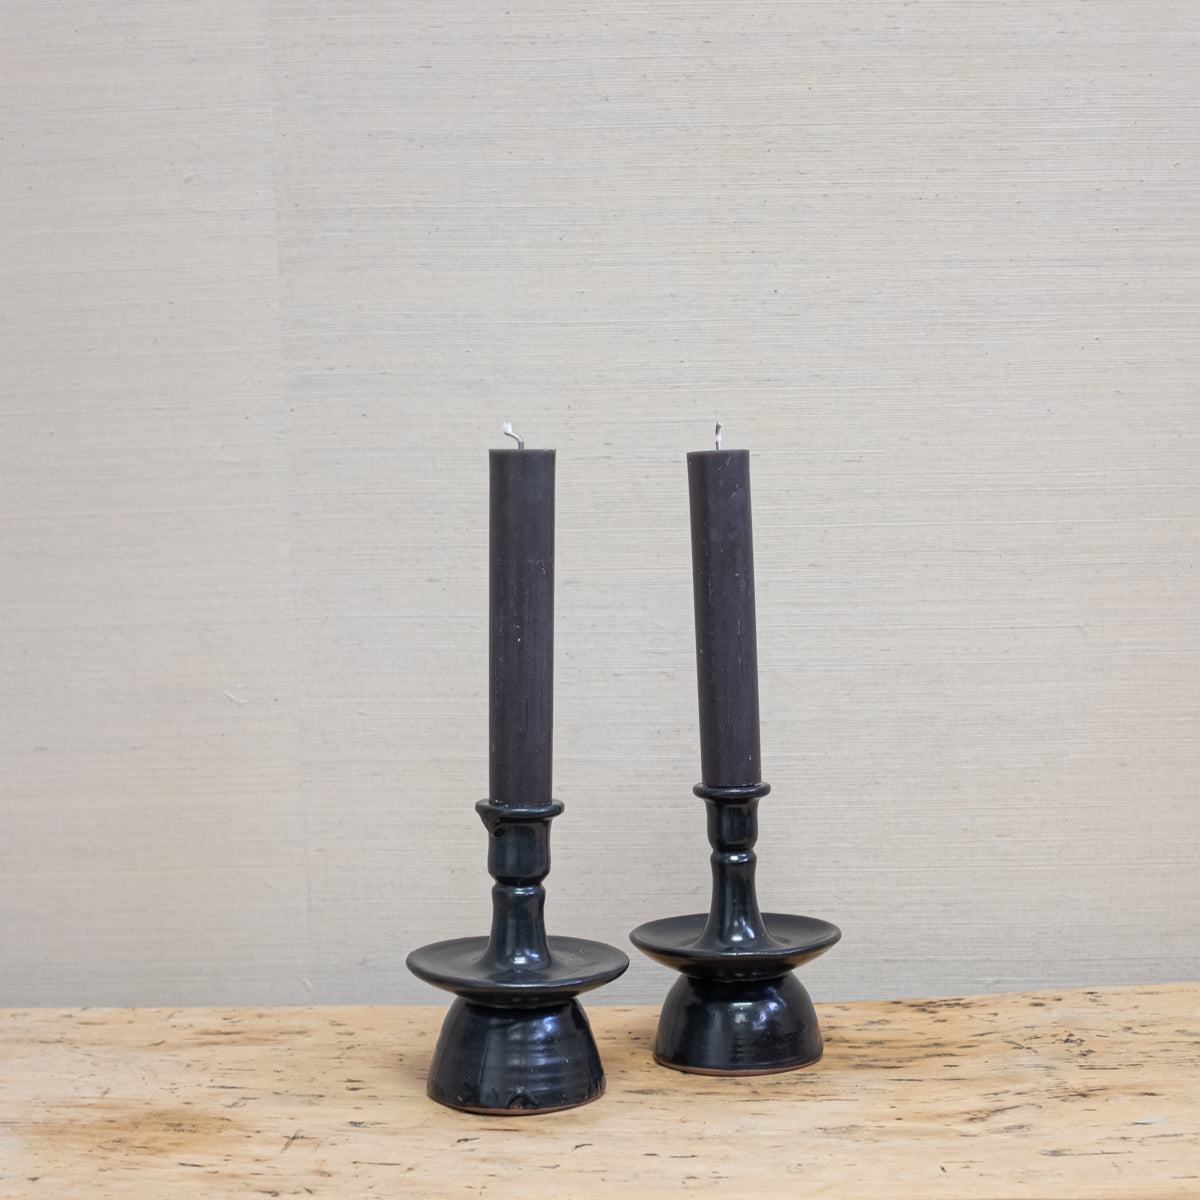 green-black candles in black pottery candleholders